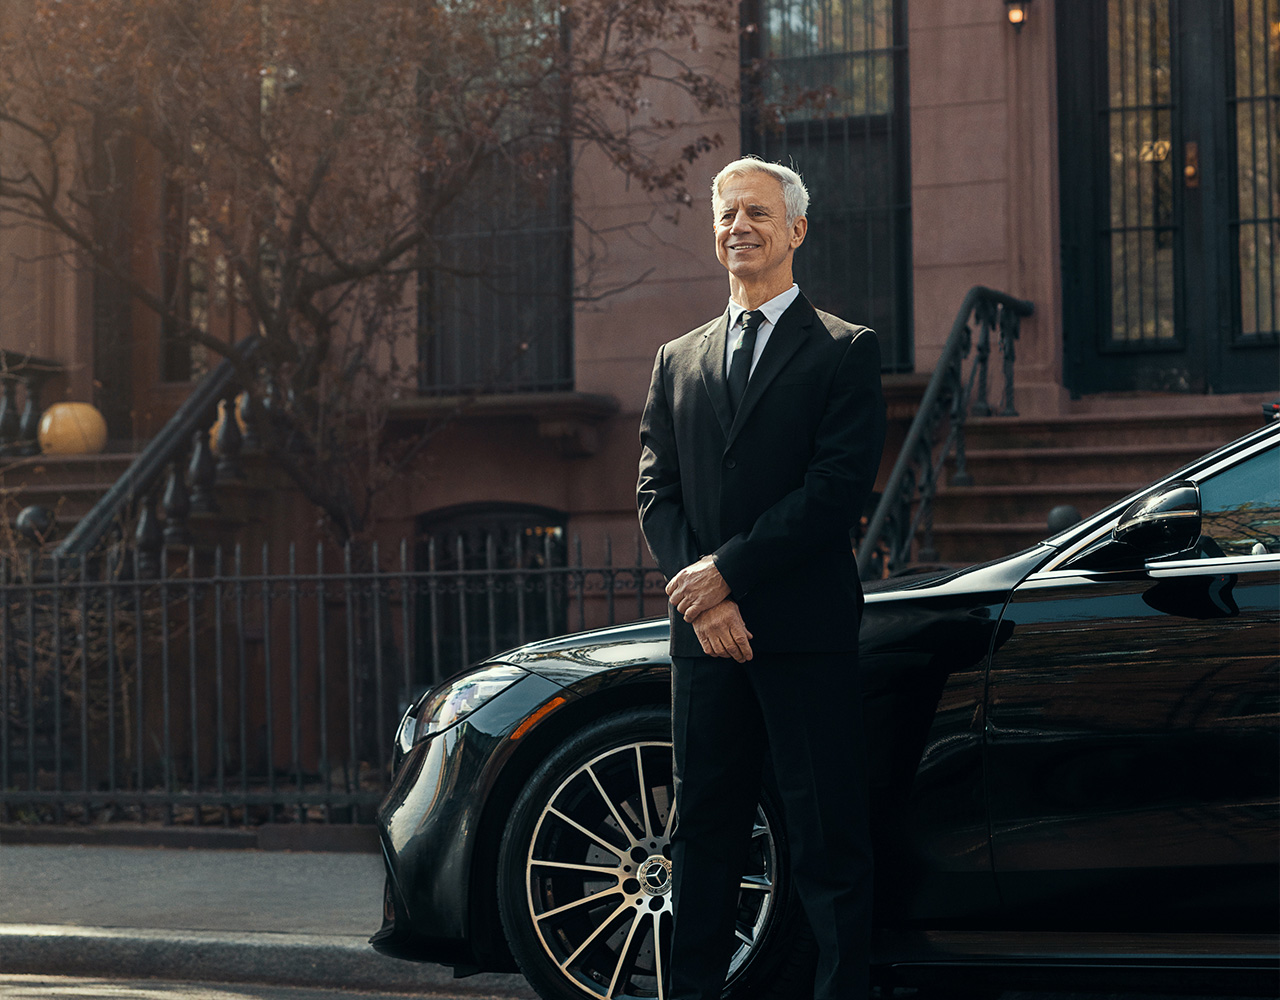 A smiling and cleancut chauffeur stands beside his stylish vehicle.